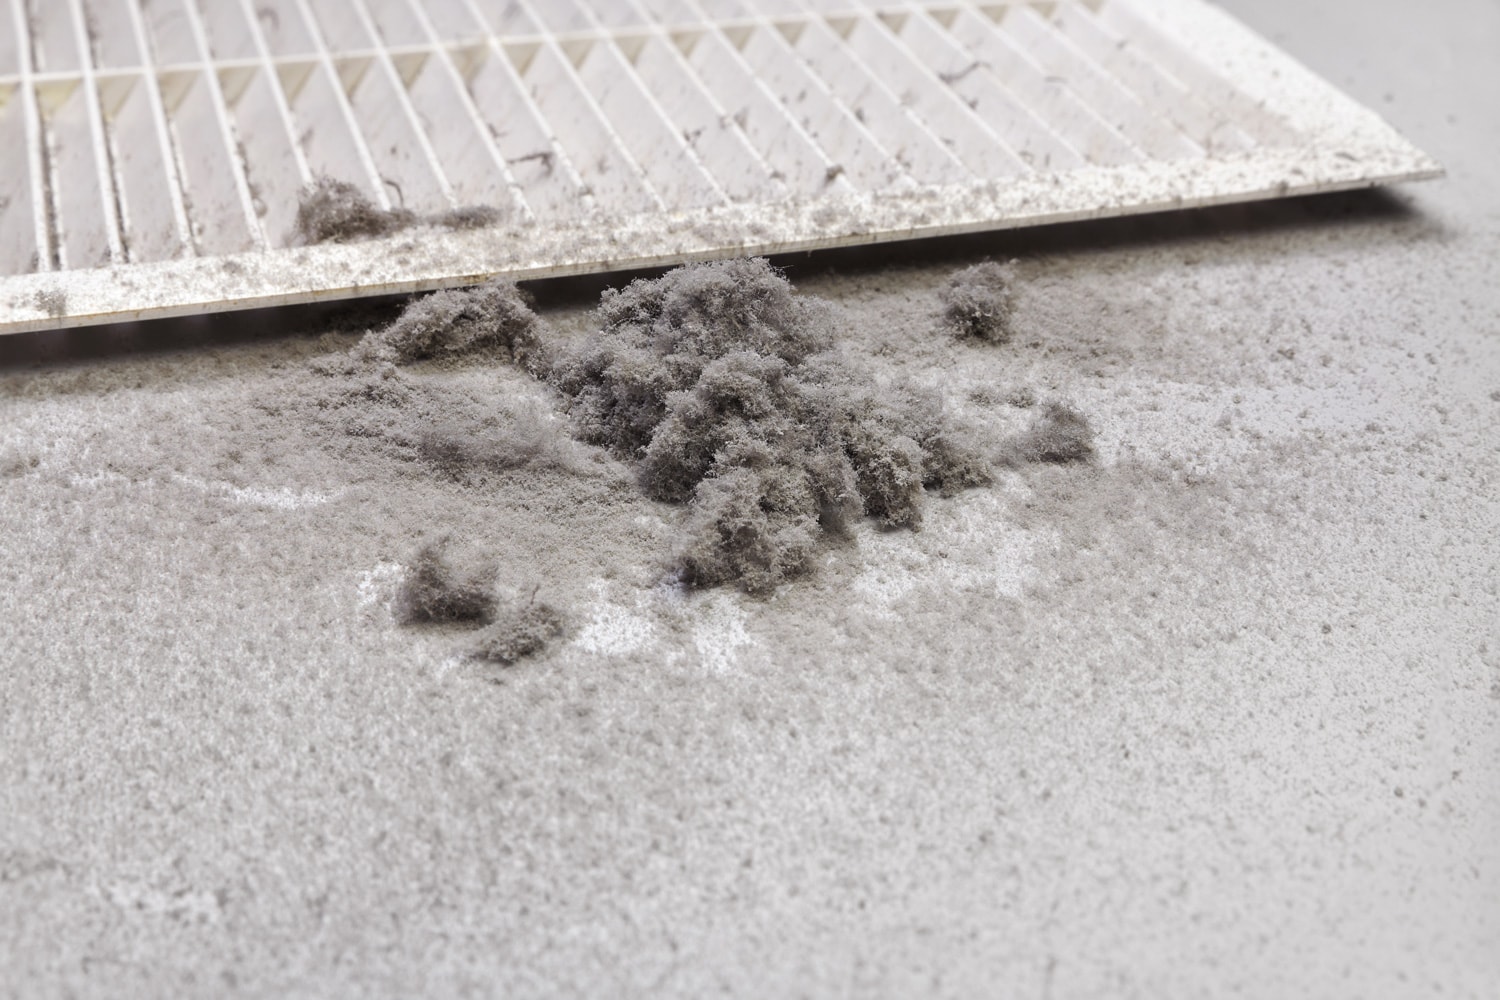 Dust is collected from the duct filter. Harmful dust in the room